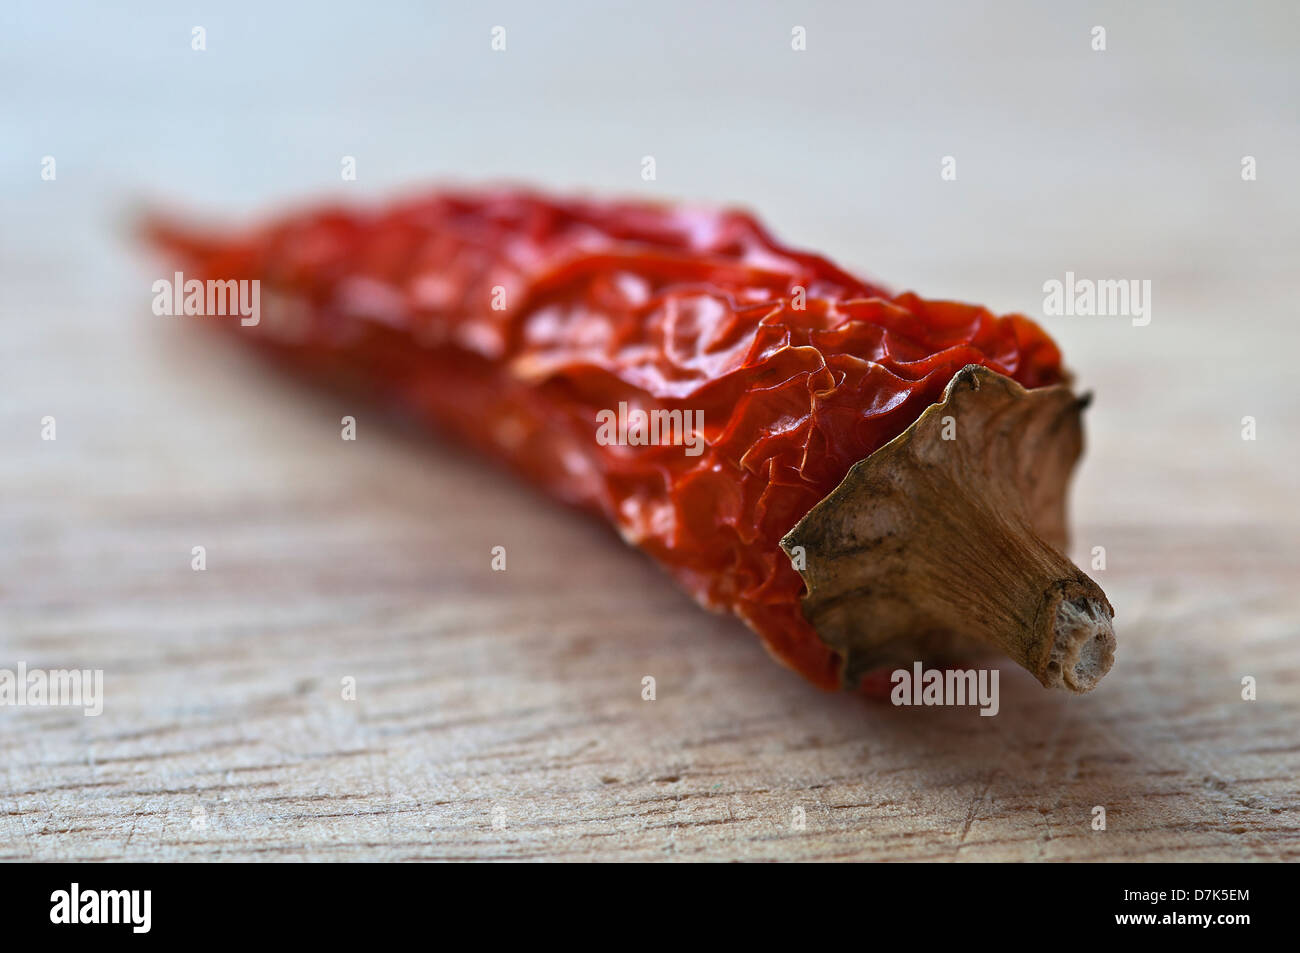 Naturally lit macro image of a dried whole chilli, lay on a wooden chopping board Stock Photo